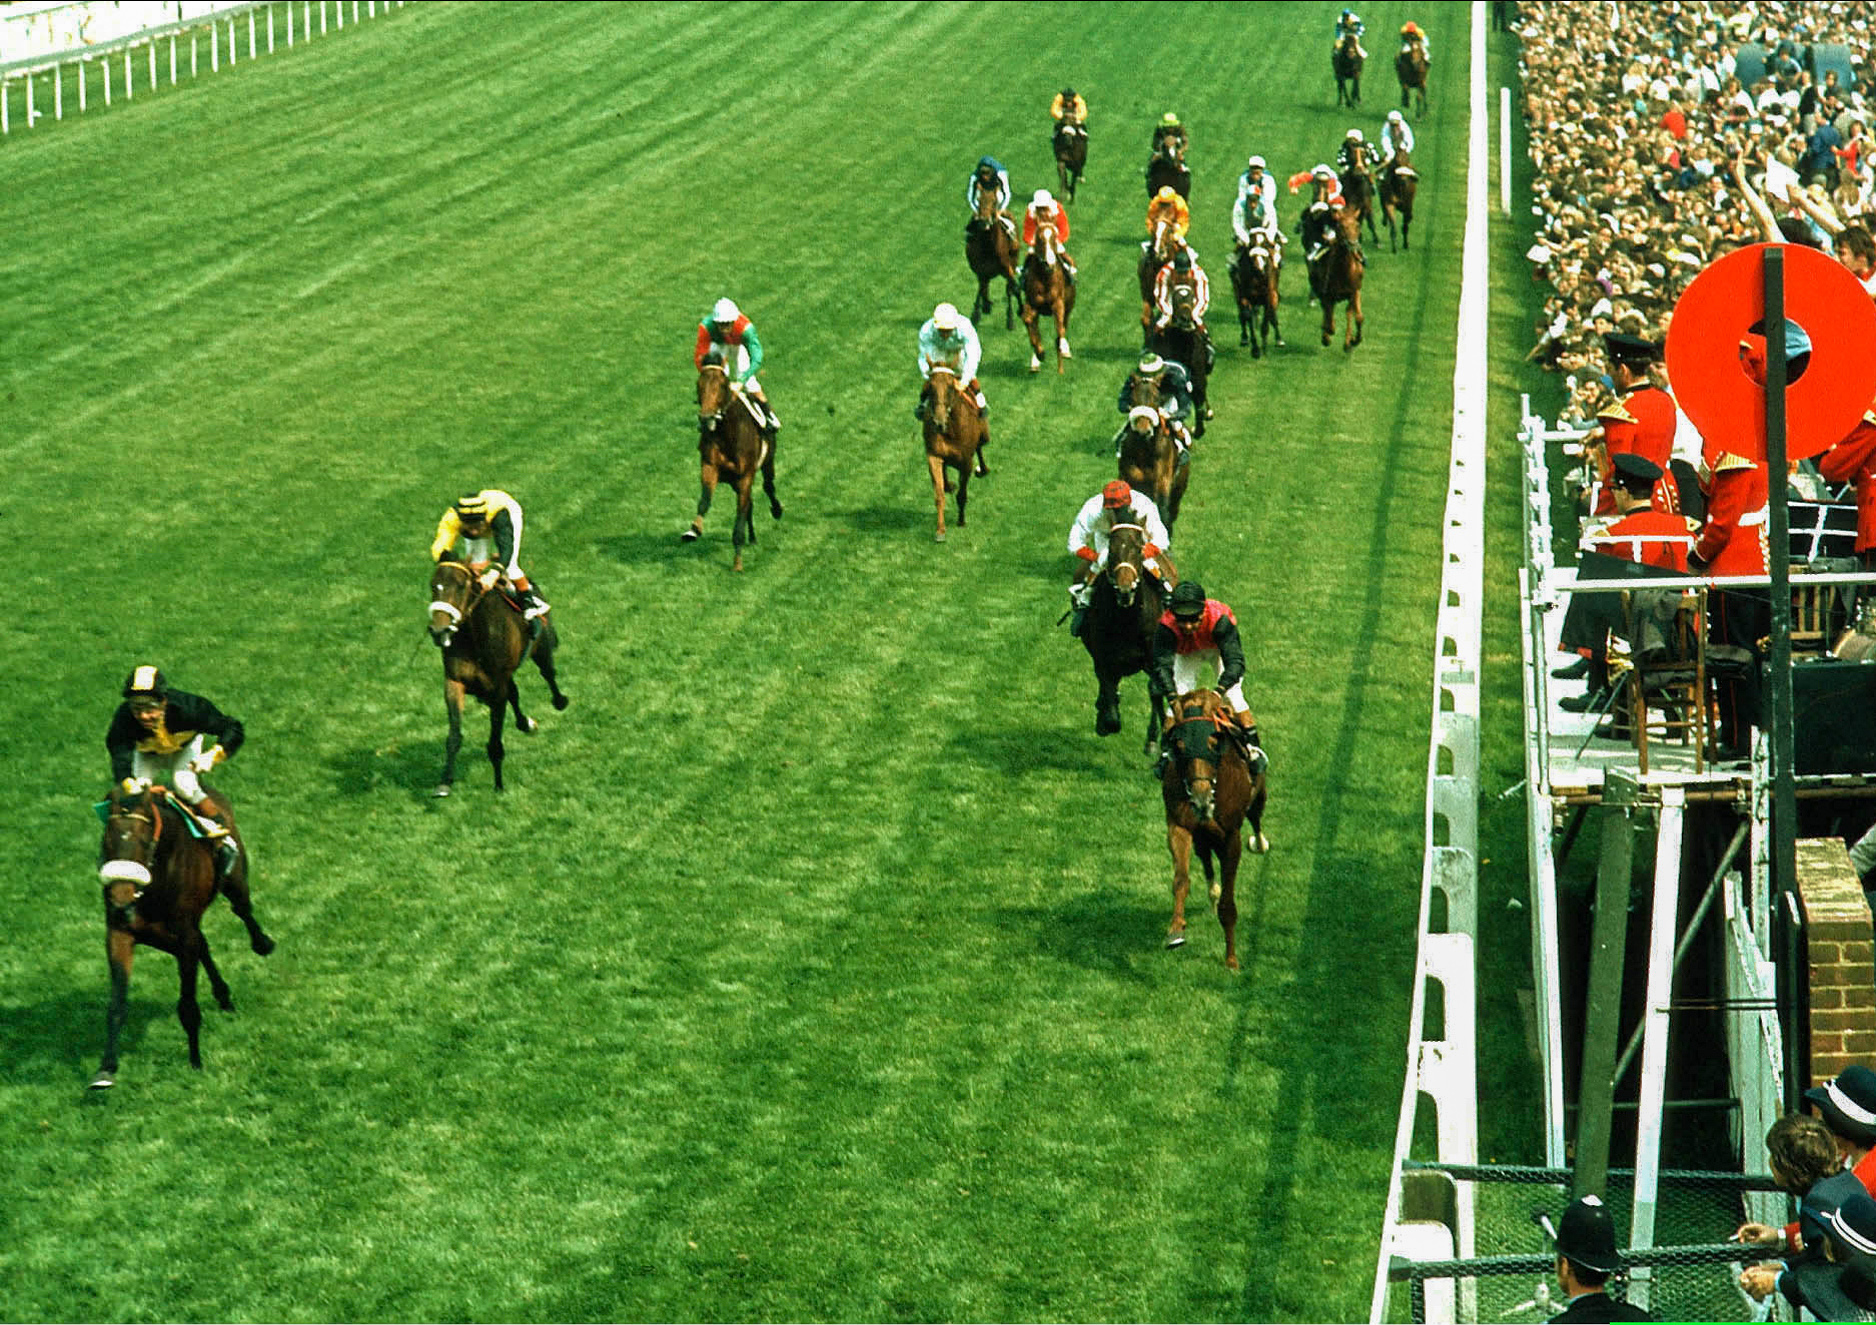 Derby triumph: Mill Reef storms home to score at Epsom – the King George and Arc were to follow in a famous European treble in 1971. Photo: Gerry Cranham / ©markcranham-focusonracing.com